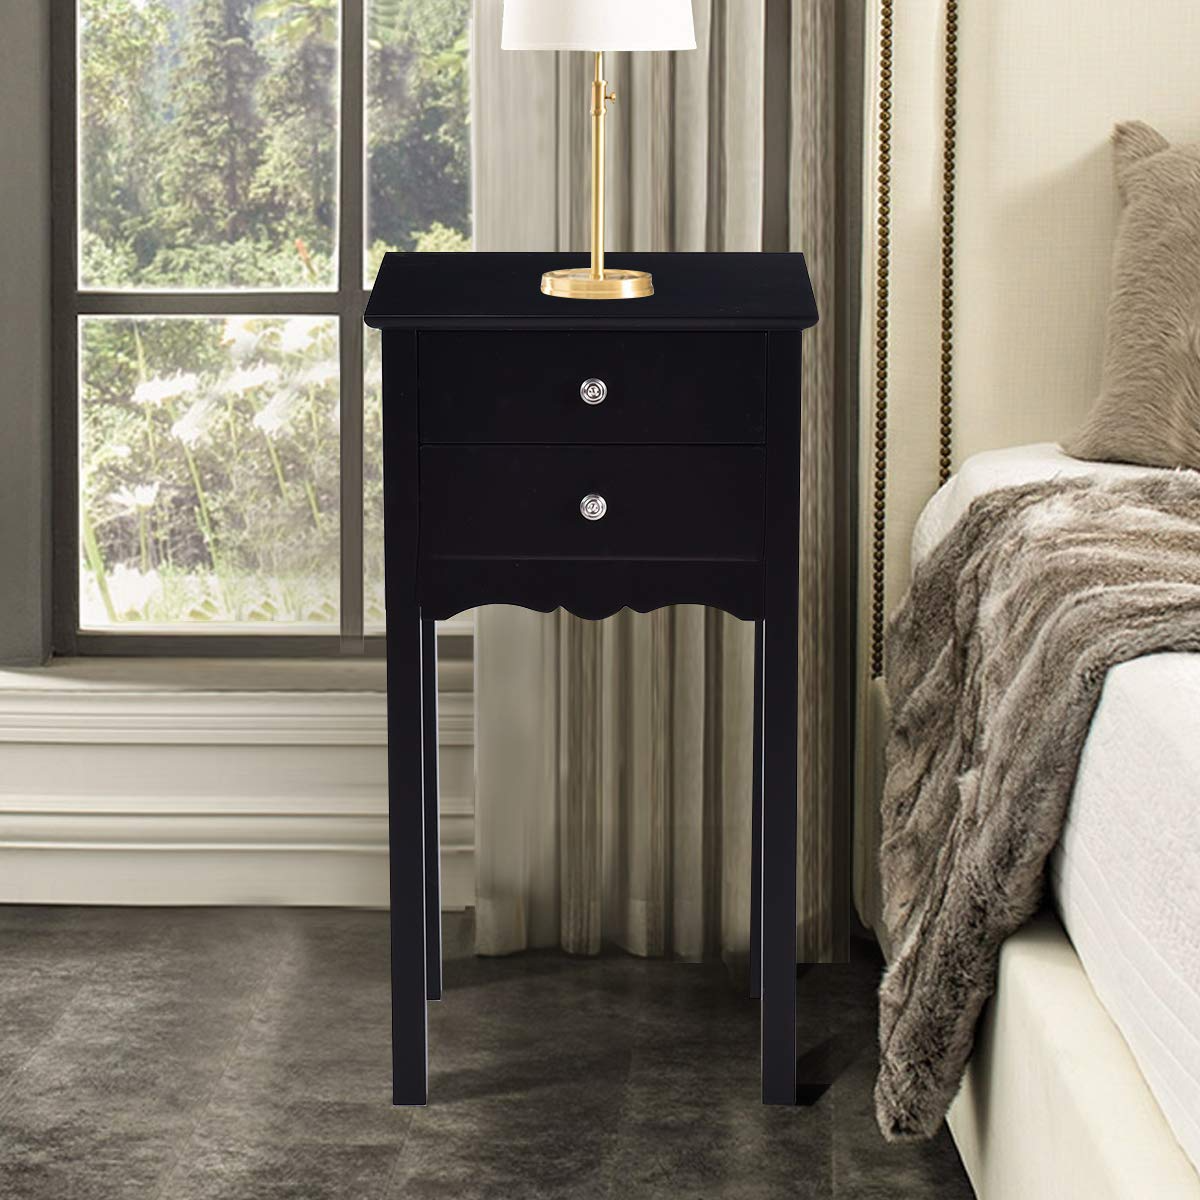 Giantex End Table w/ 2 Drawers Side Table Nightstand Multi-Purpose Accent Table Living Room Bedroom Home Furniture